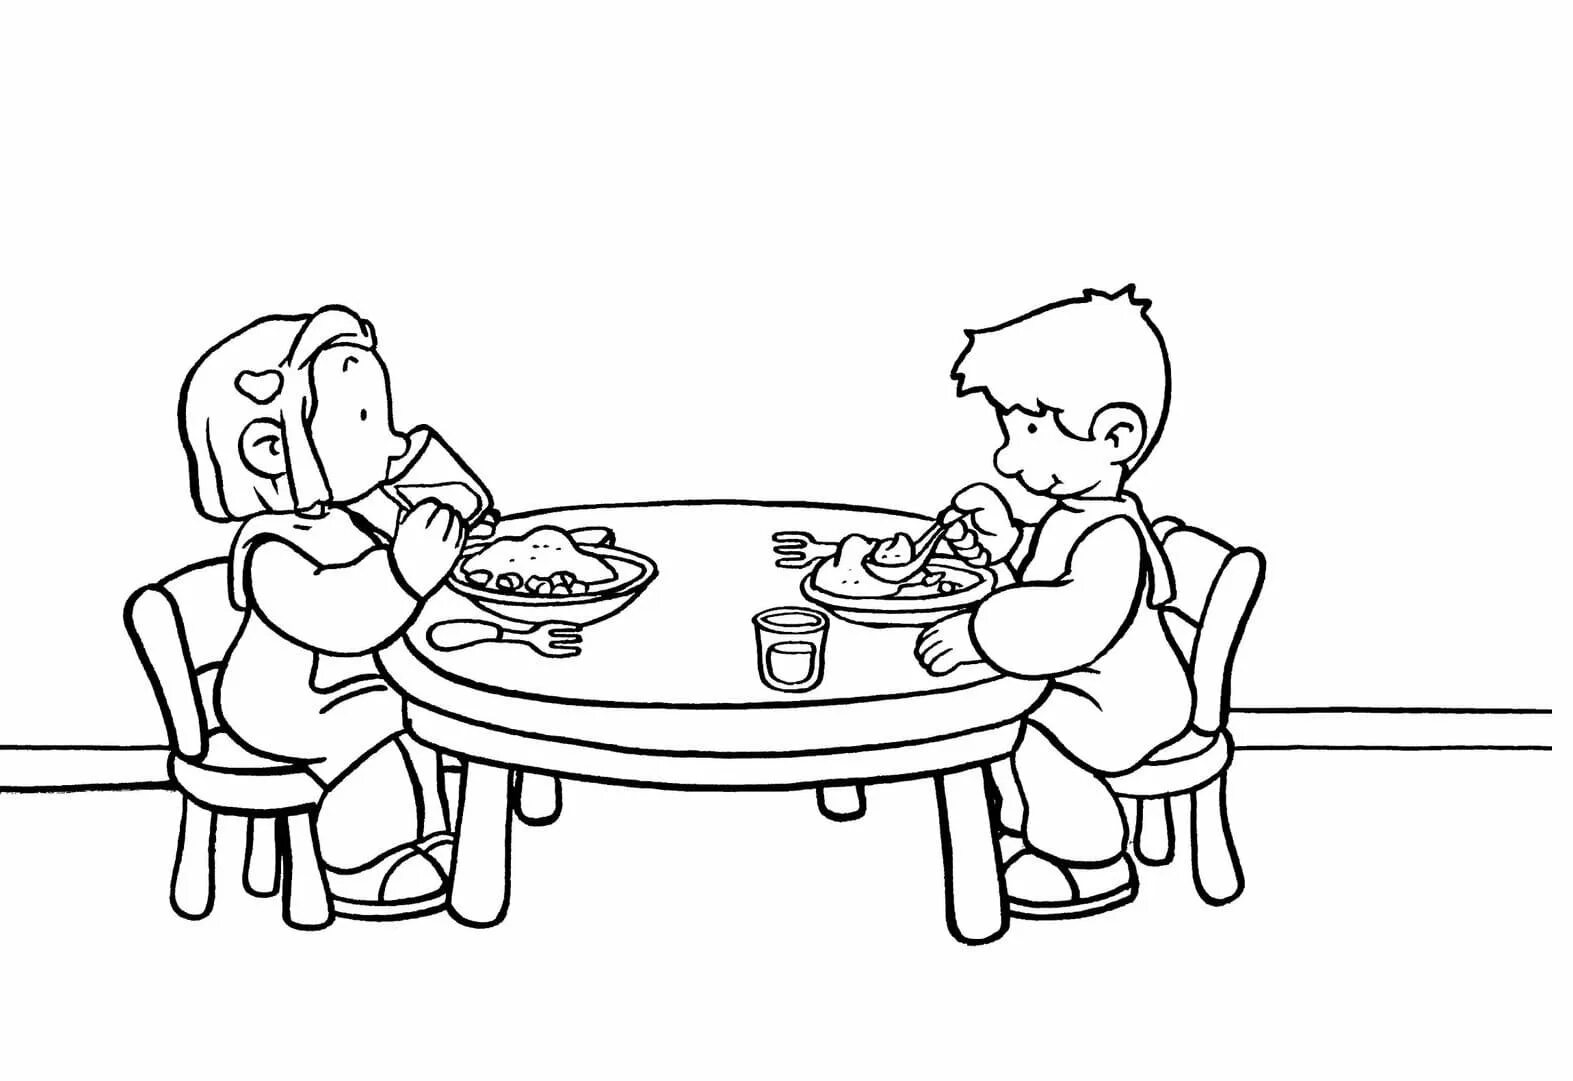 Playful school canteen coloring page